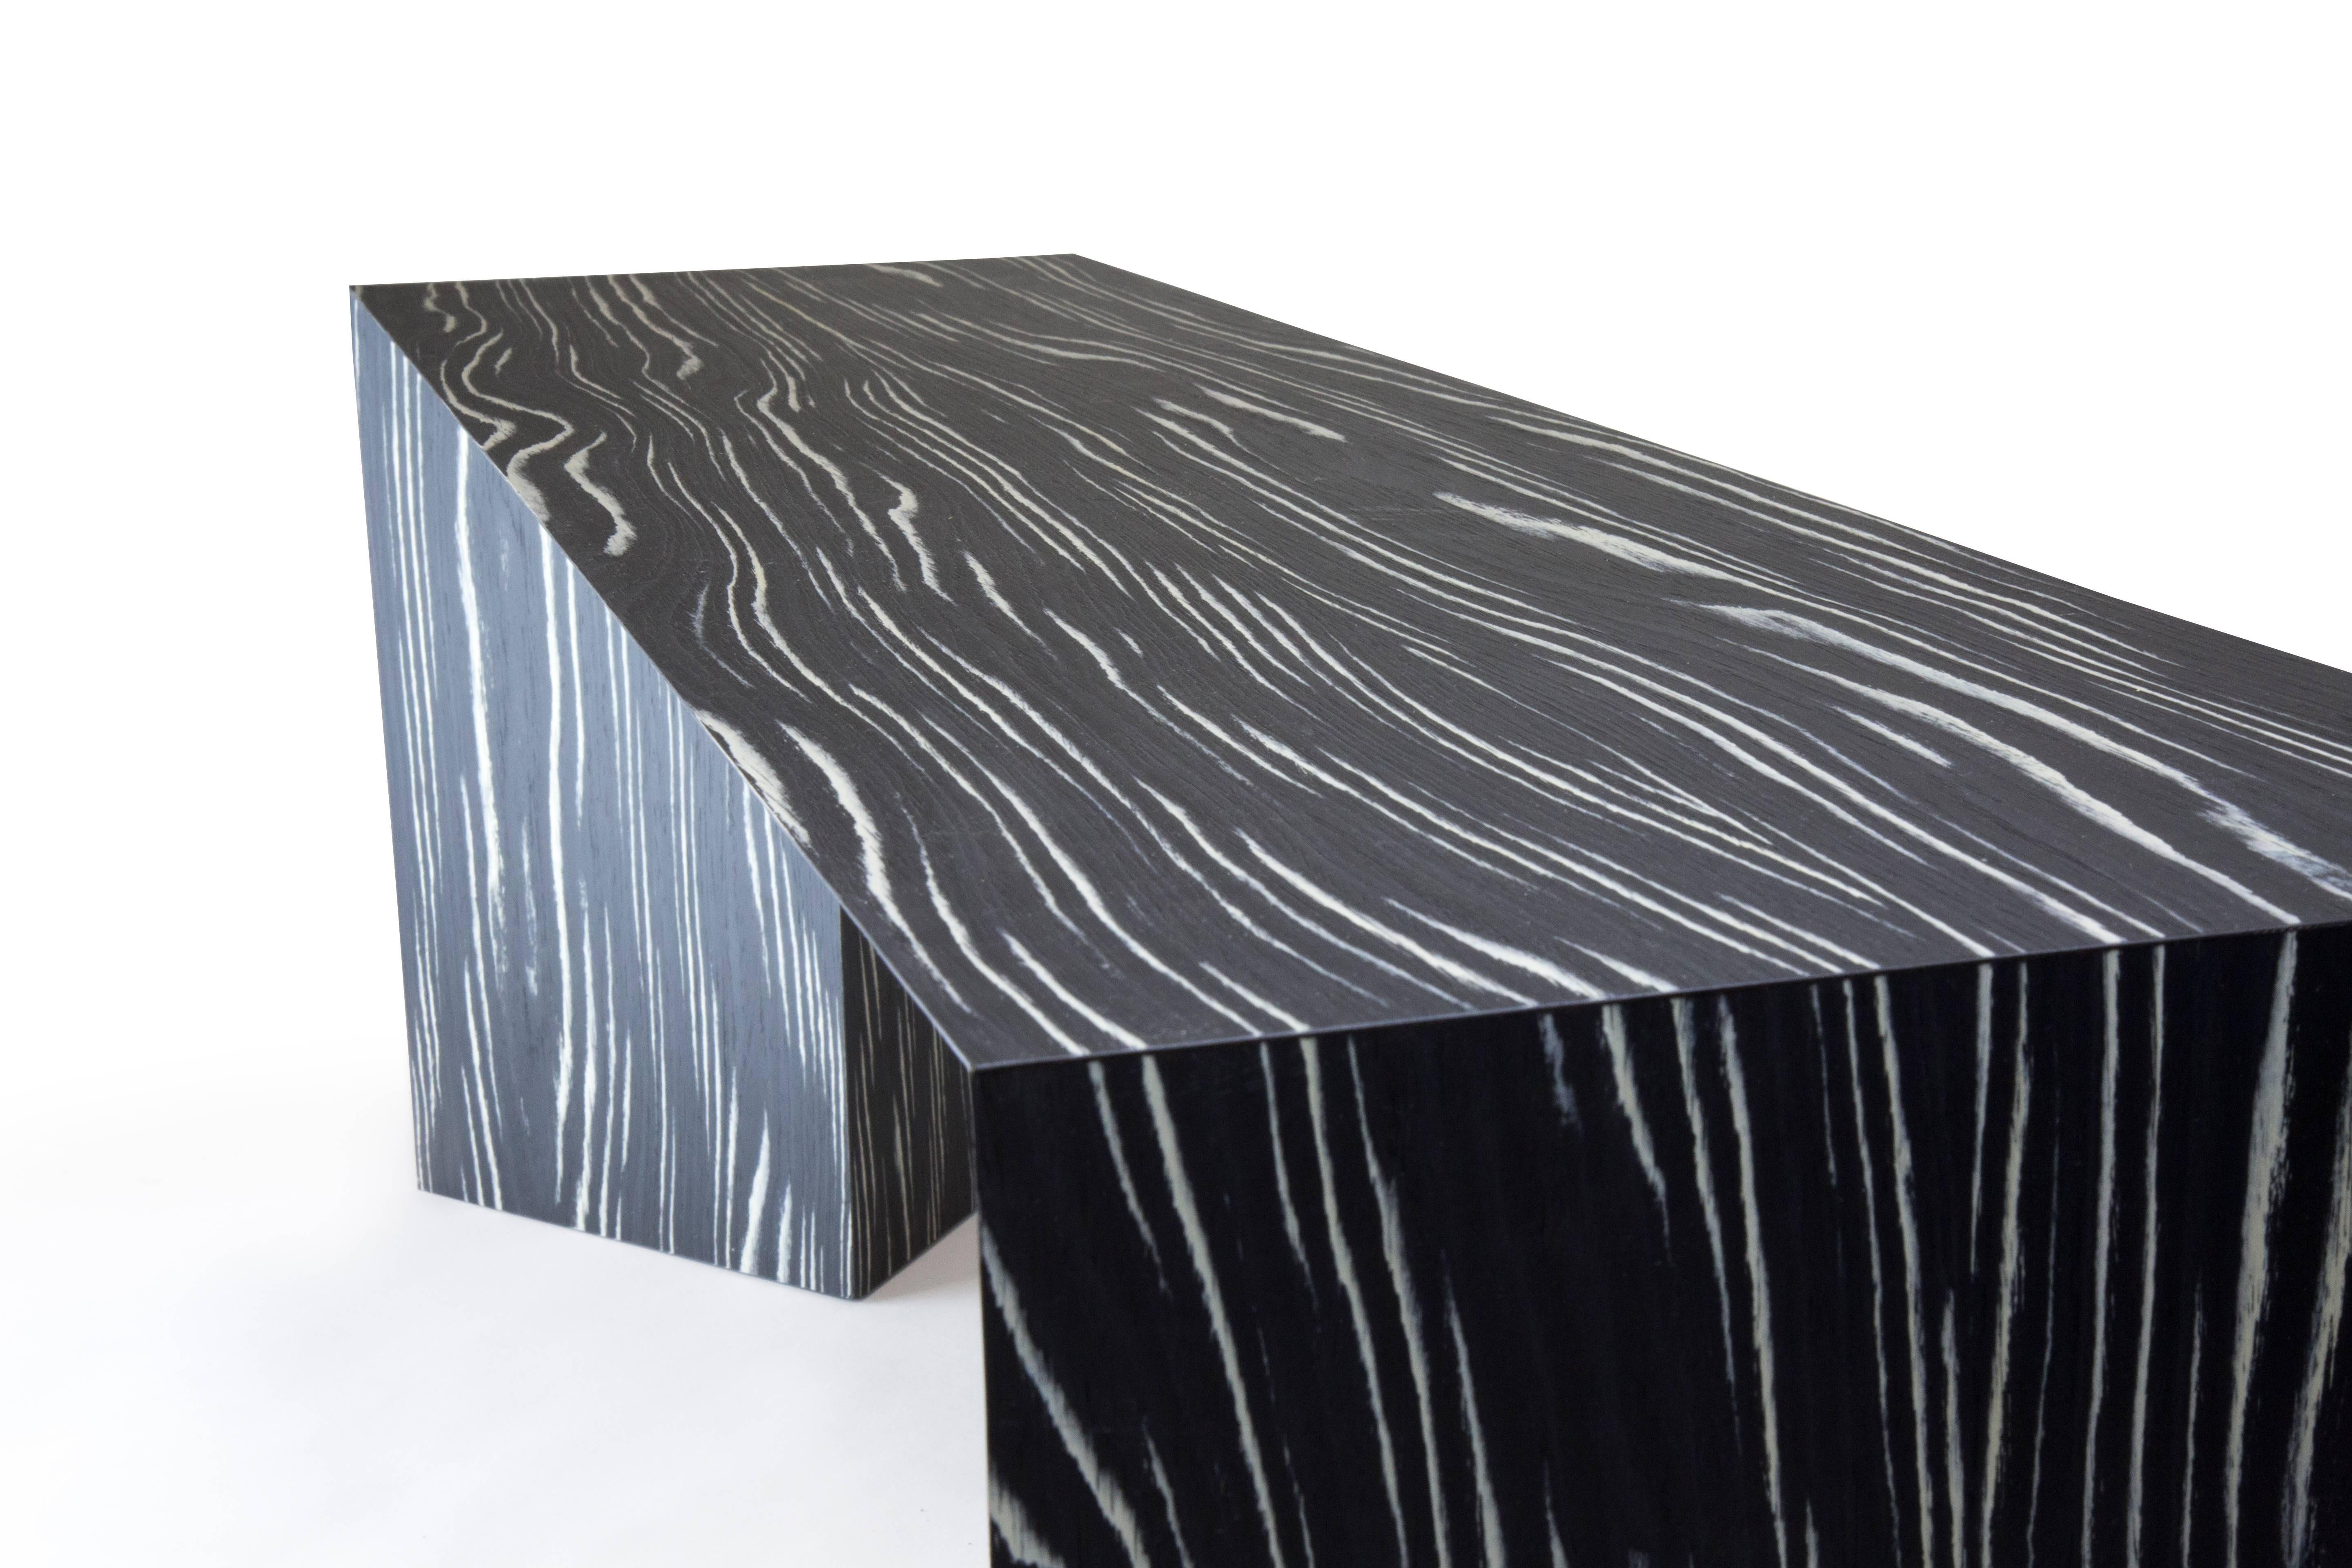 American Contemporary Minimal Black and White Ecowood Veneer Fold Bench, USA For Sale